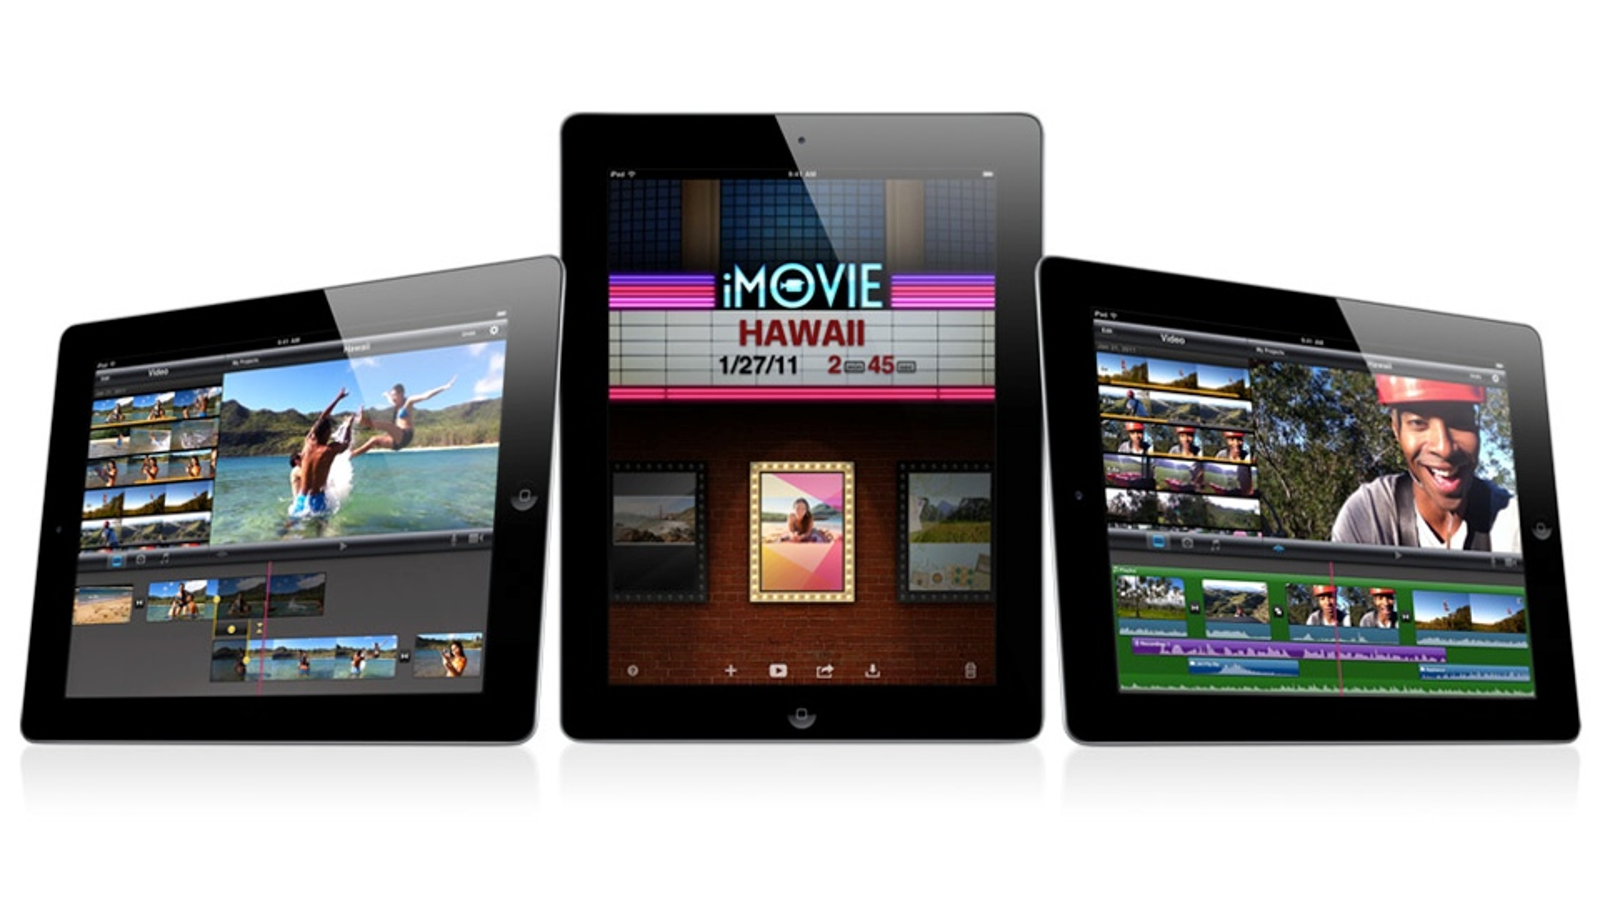 multiple picture in picture imovie ipad